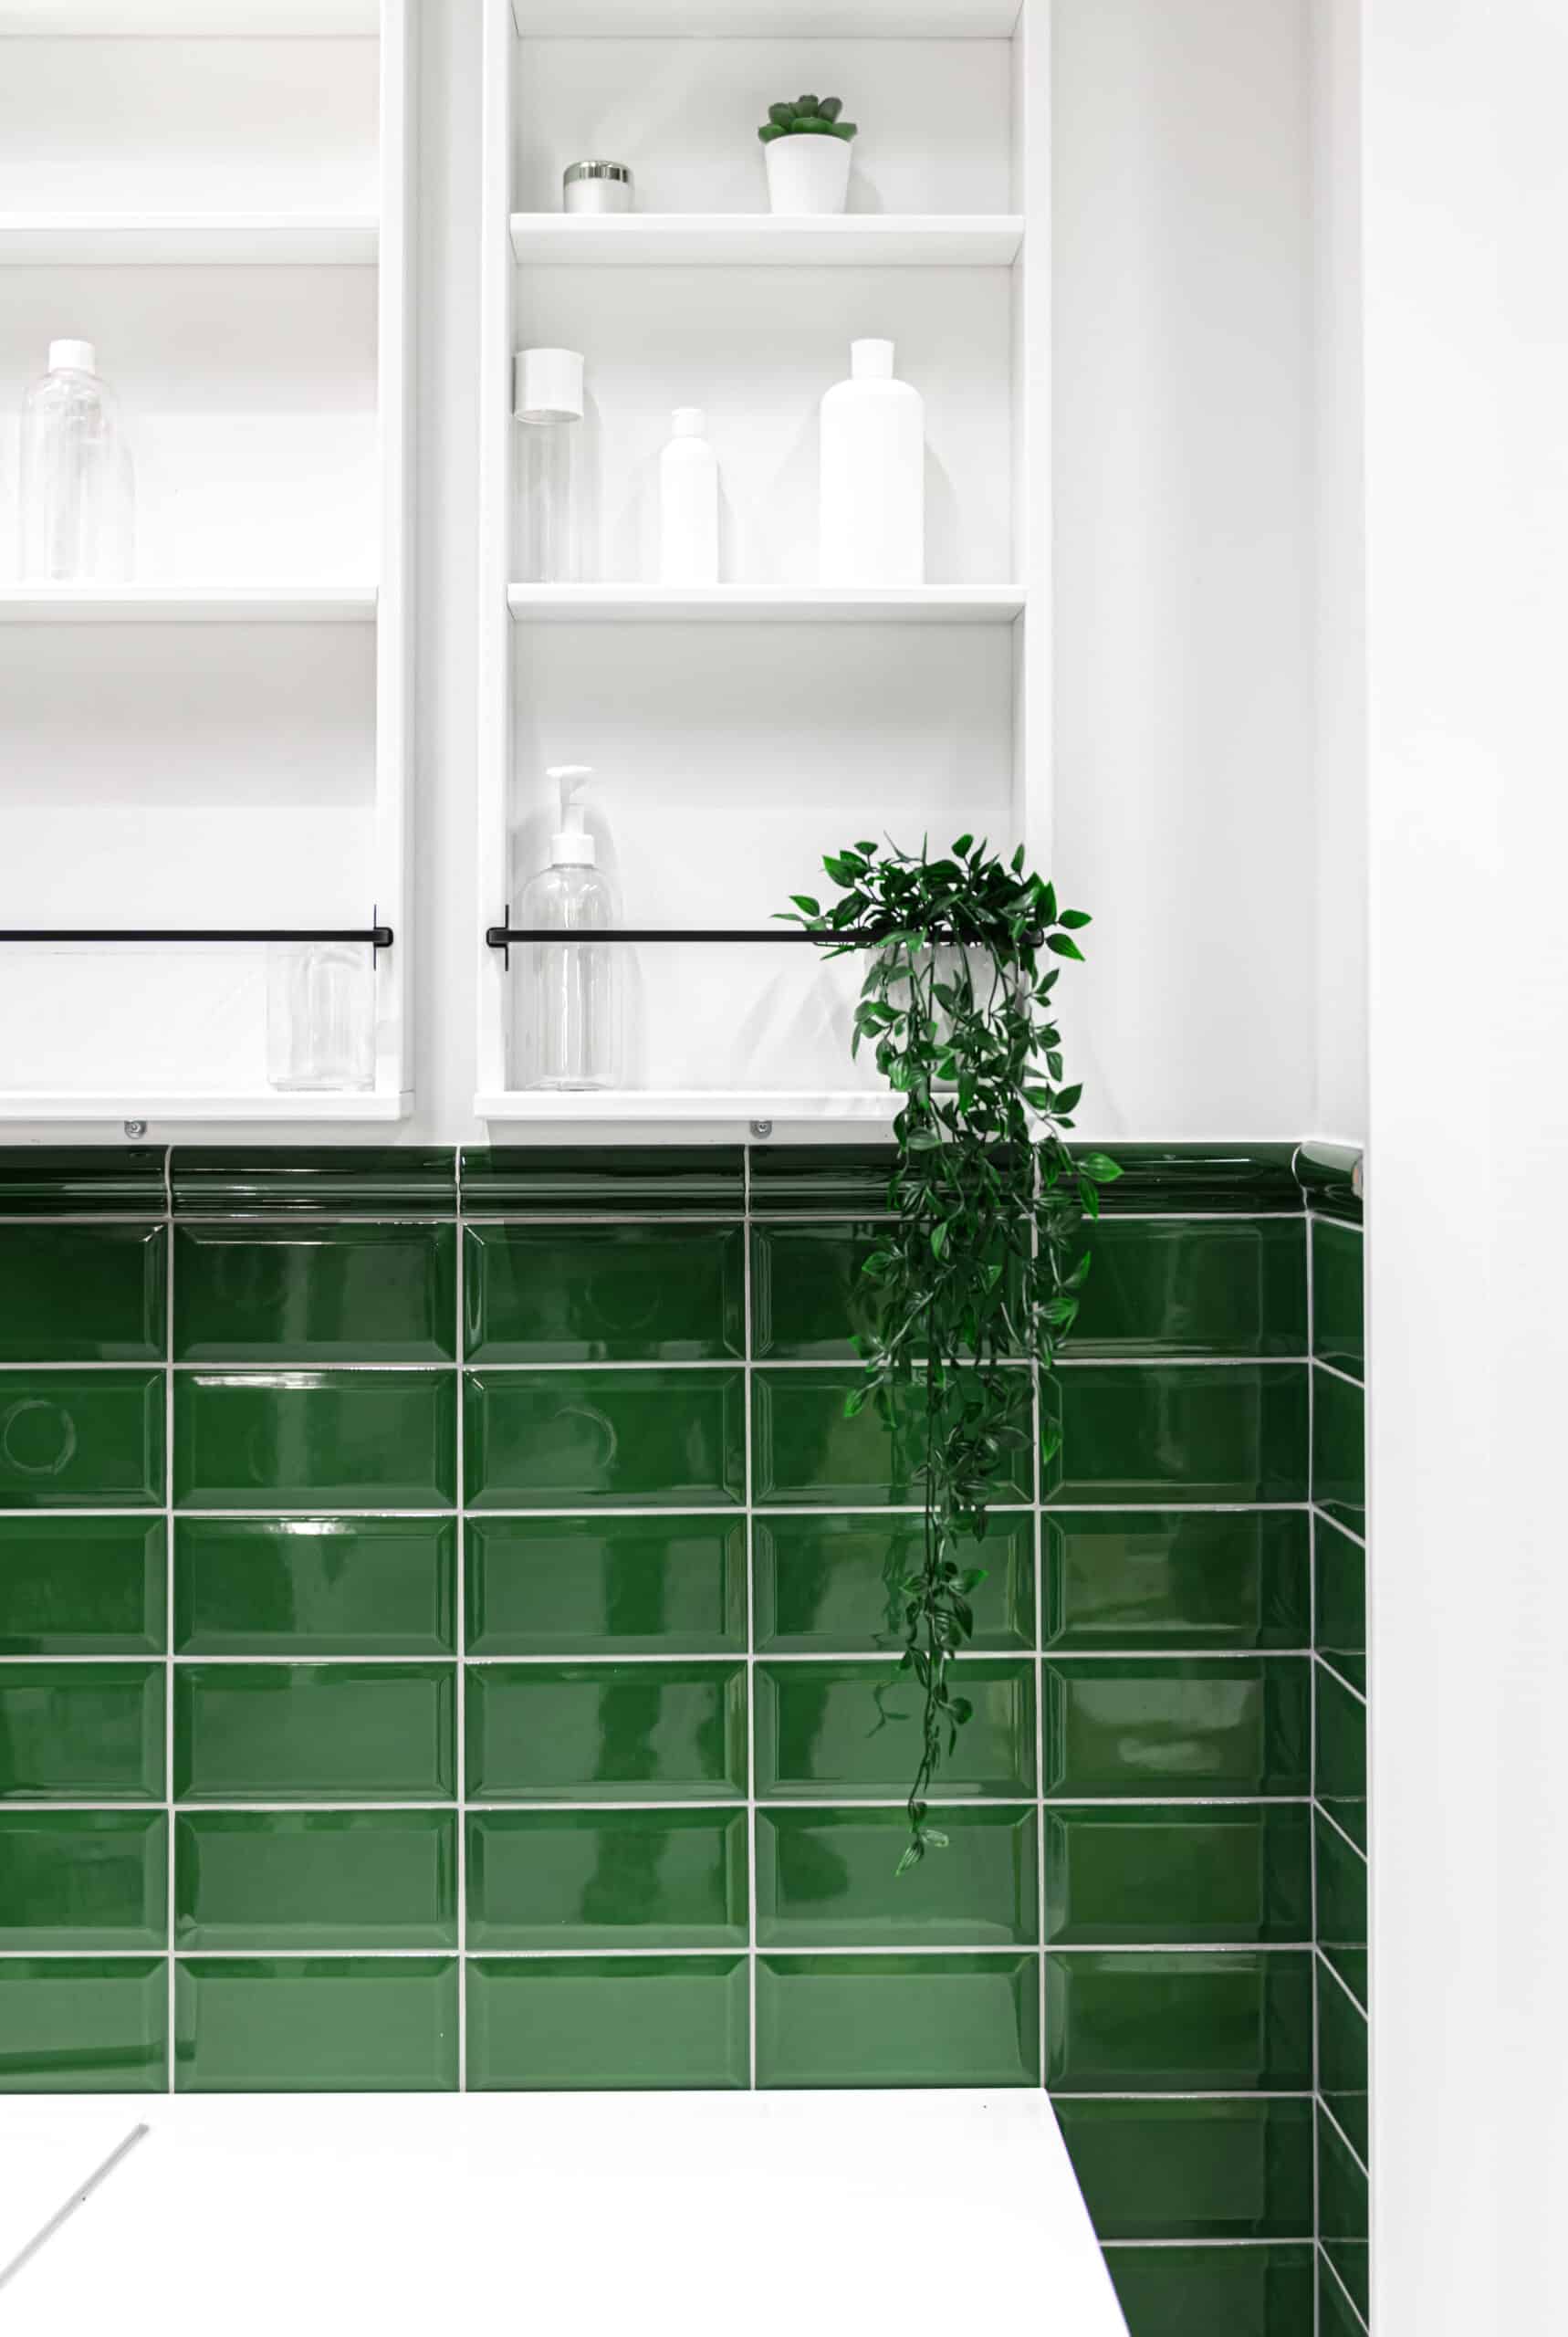 Part of the bathroom interior with green tiles and white cabinets on the wall.